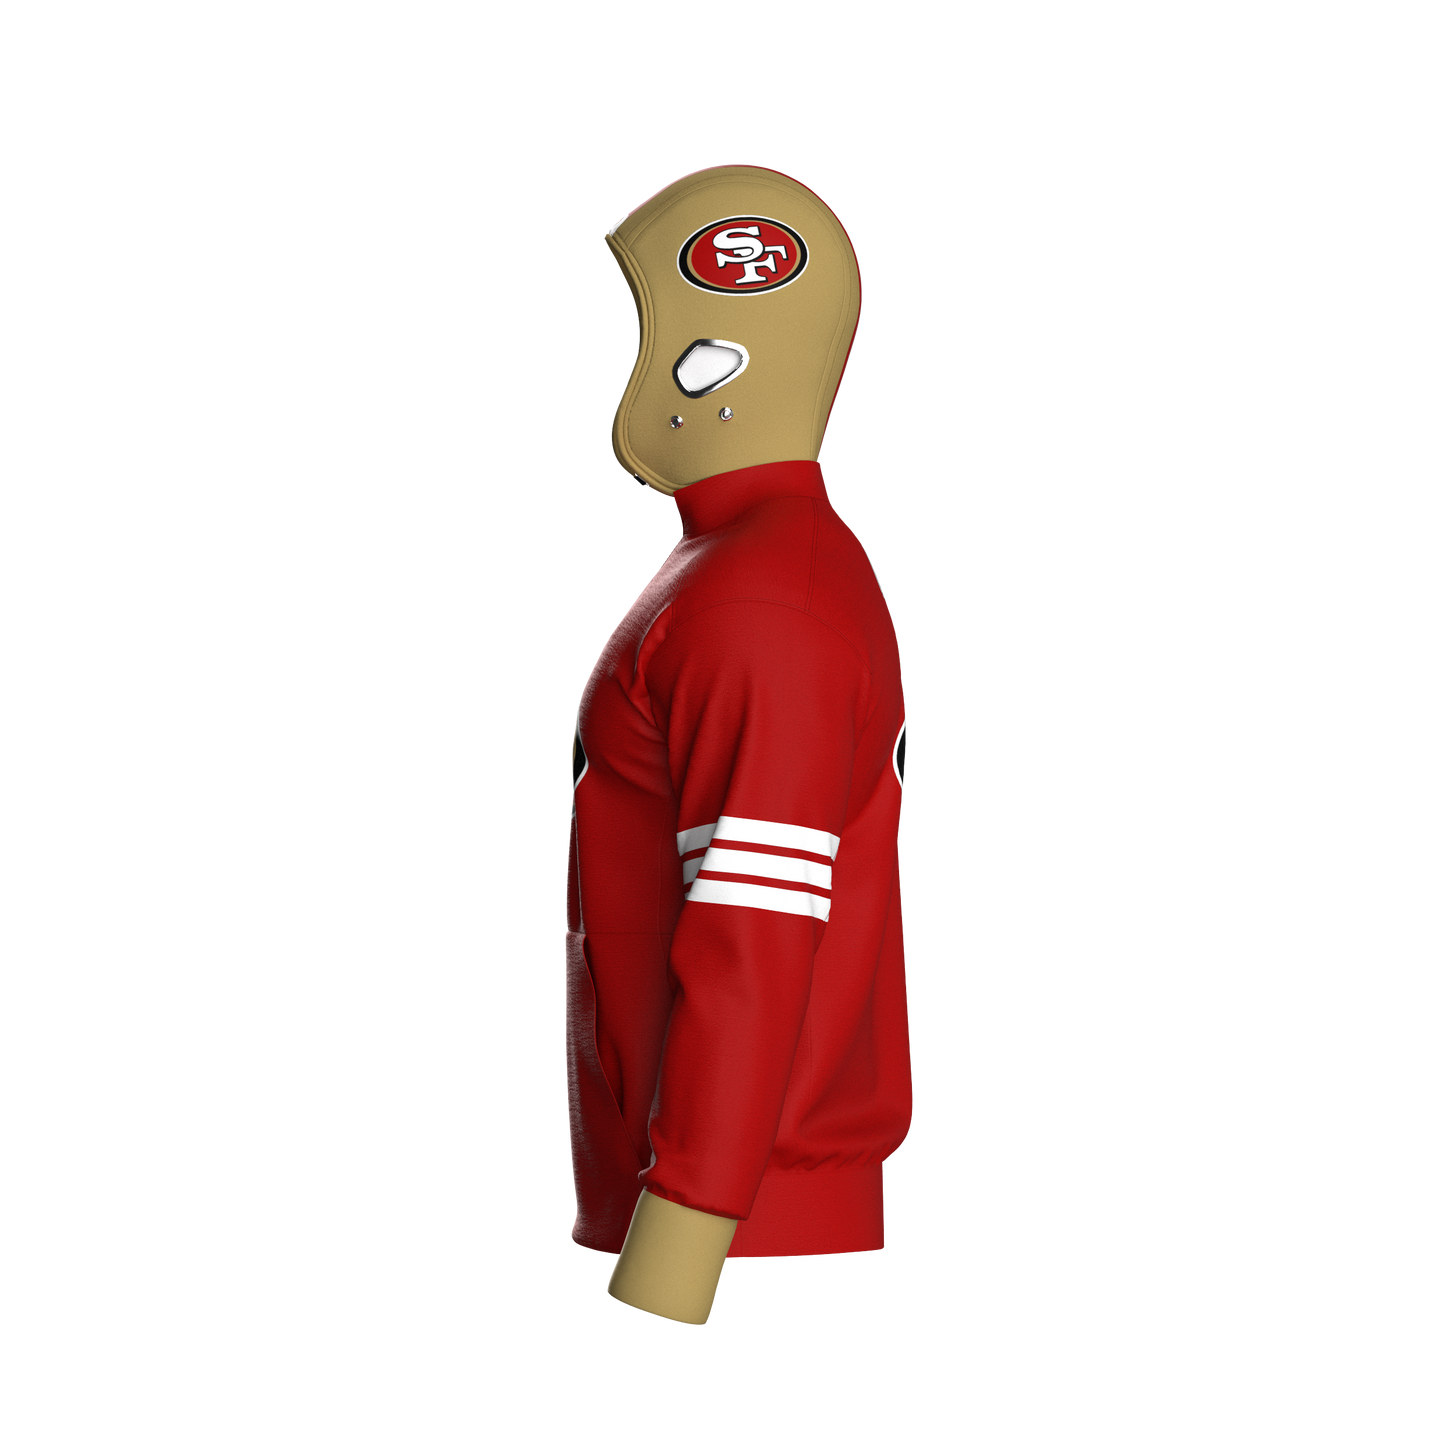 San Francisco 49ers Home Pullover (adult)